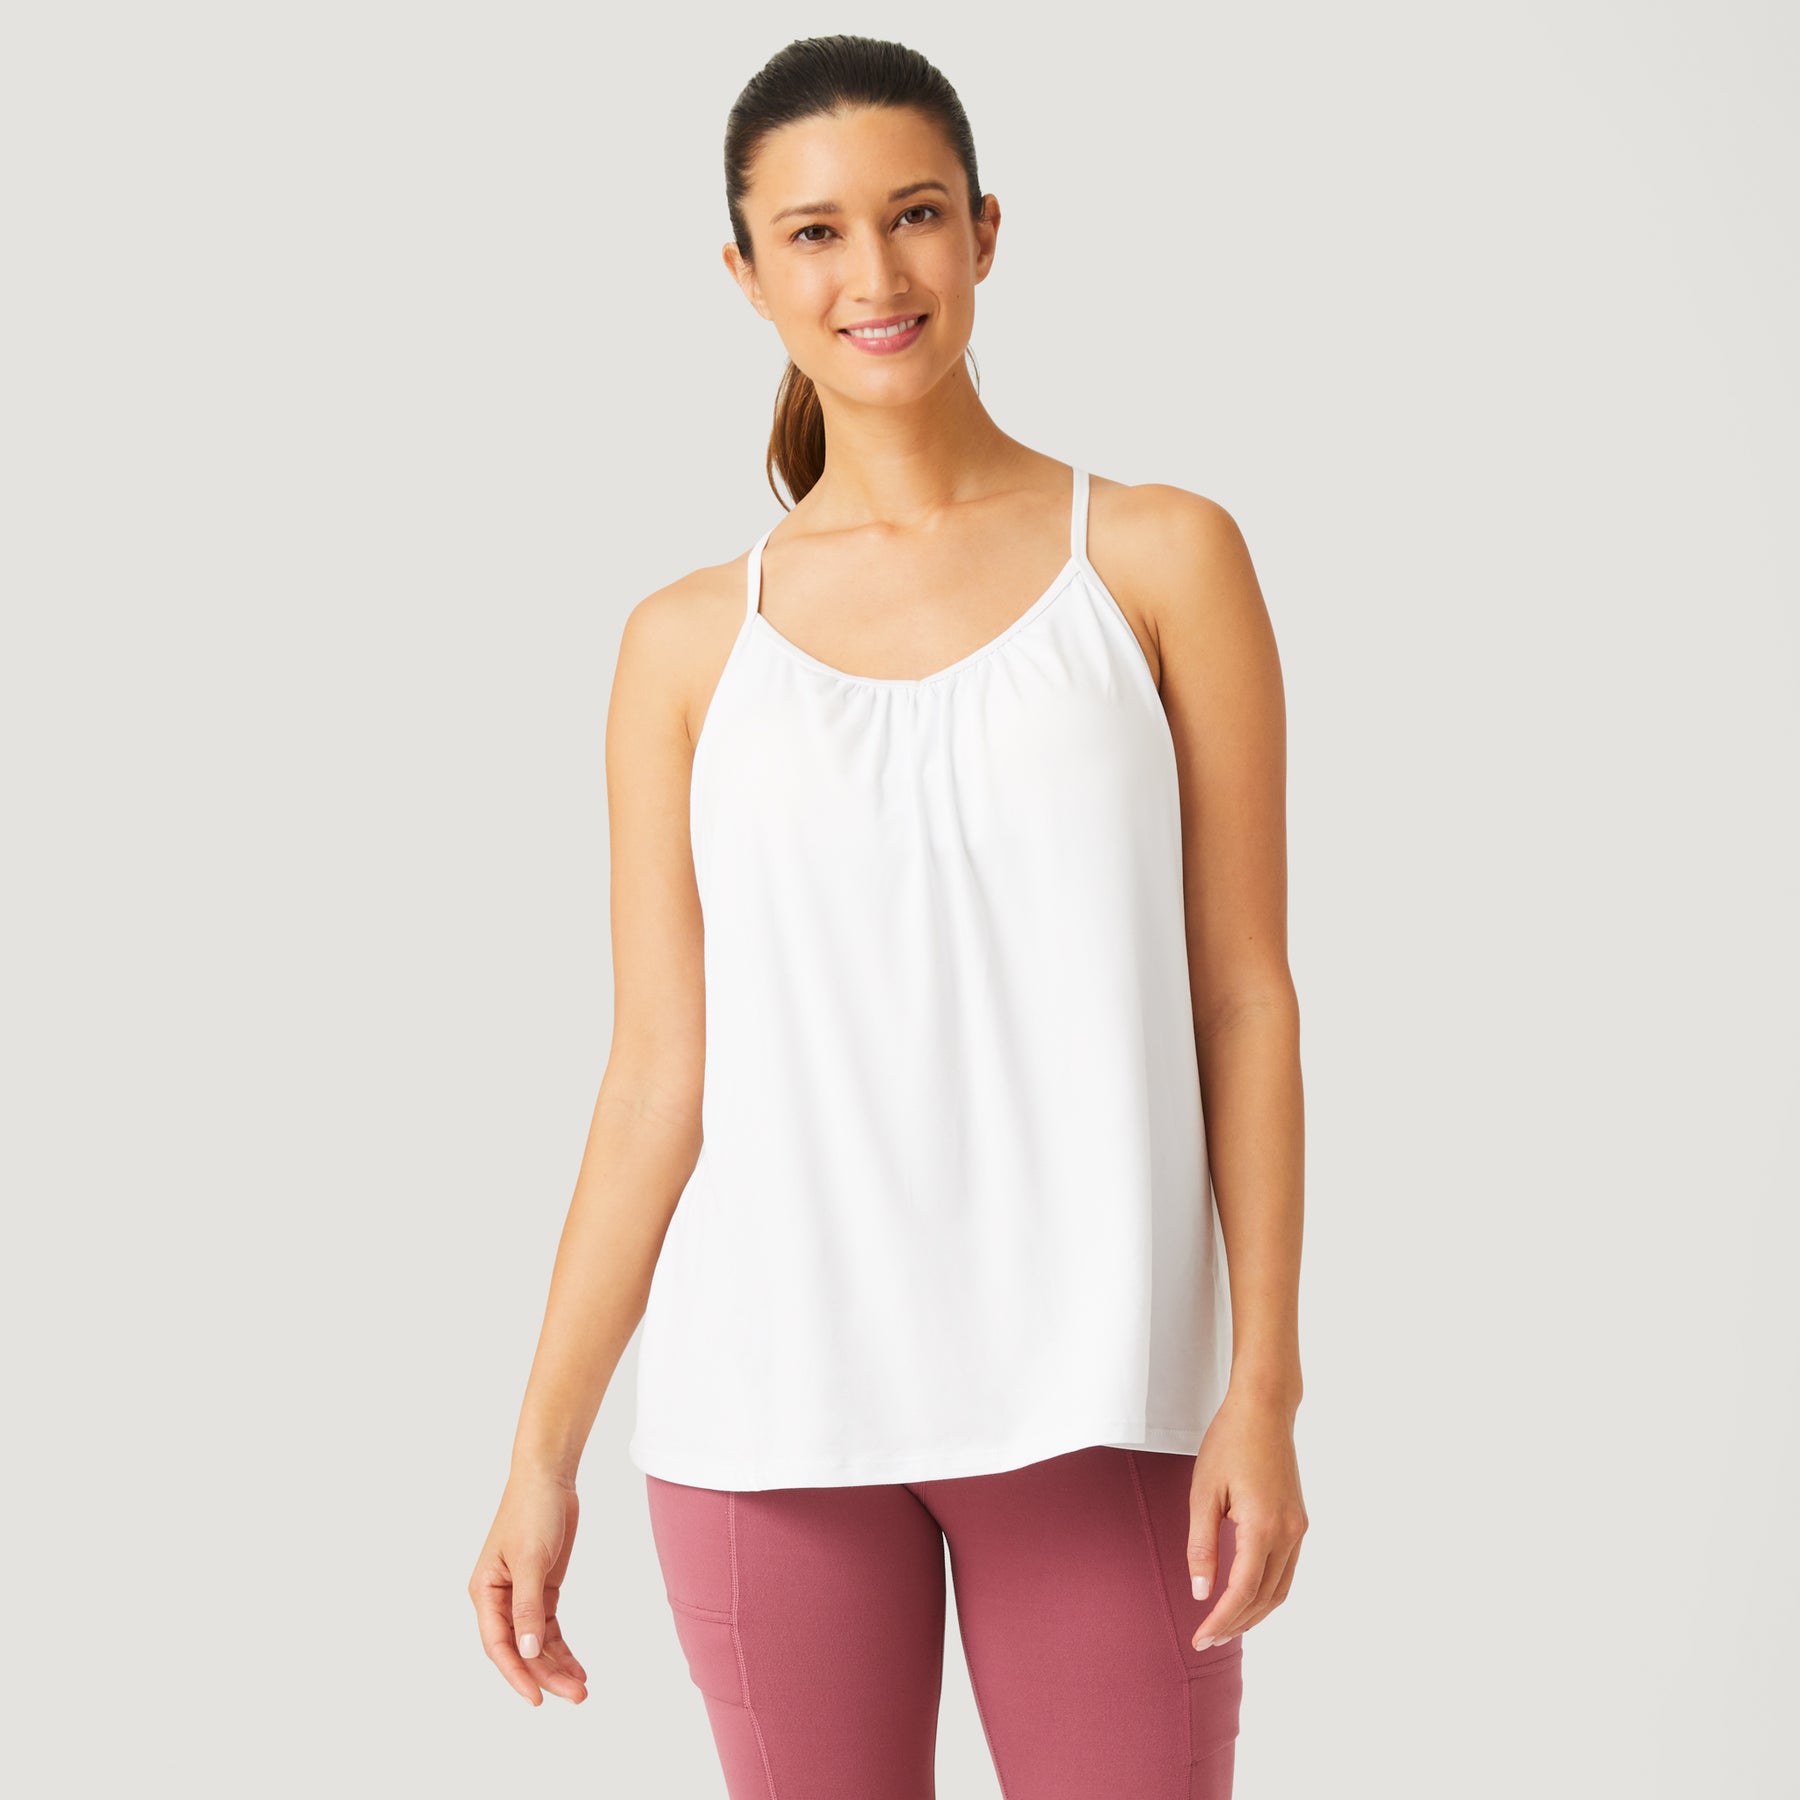  Wanvekey Tank Top with Built In Bra for Women